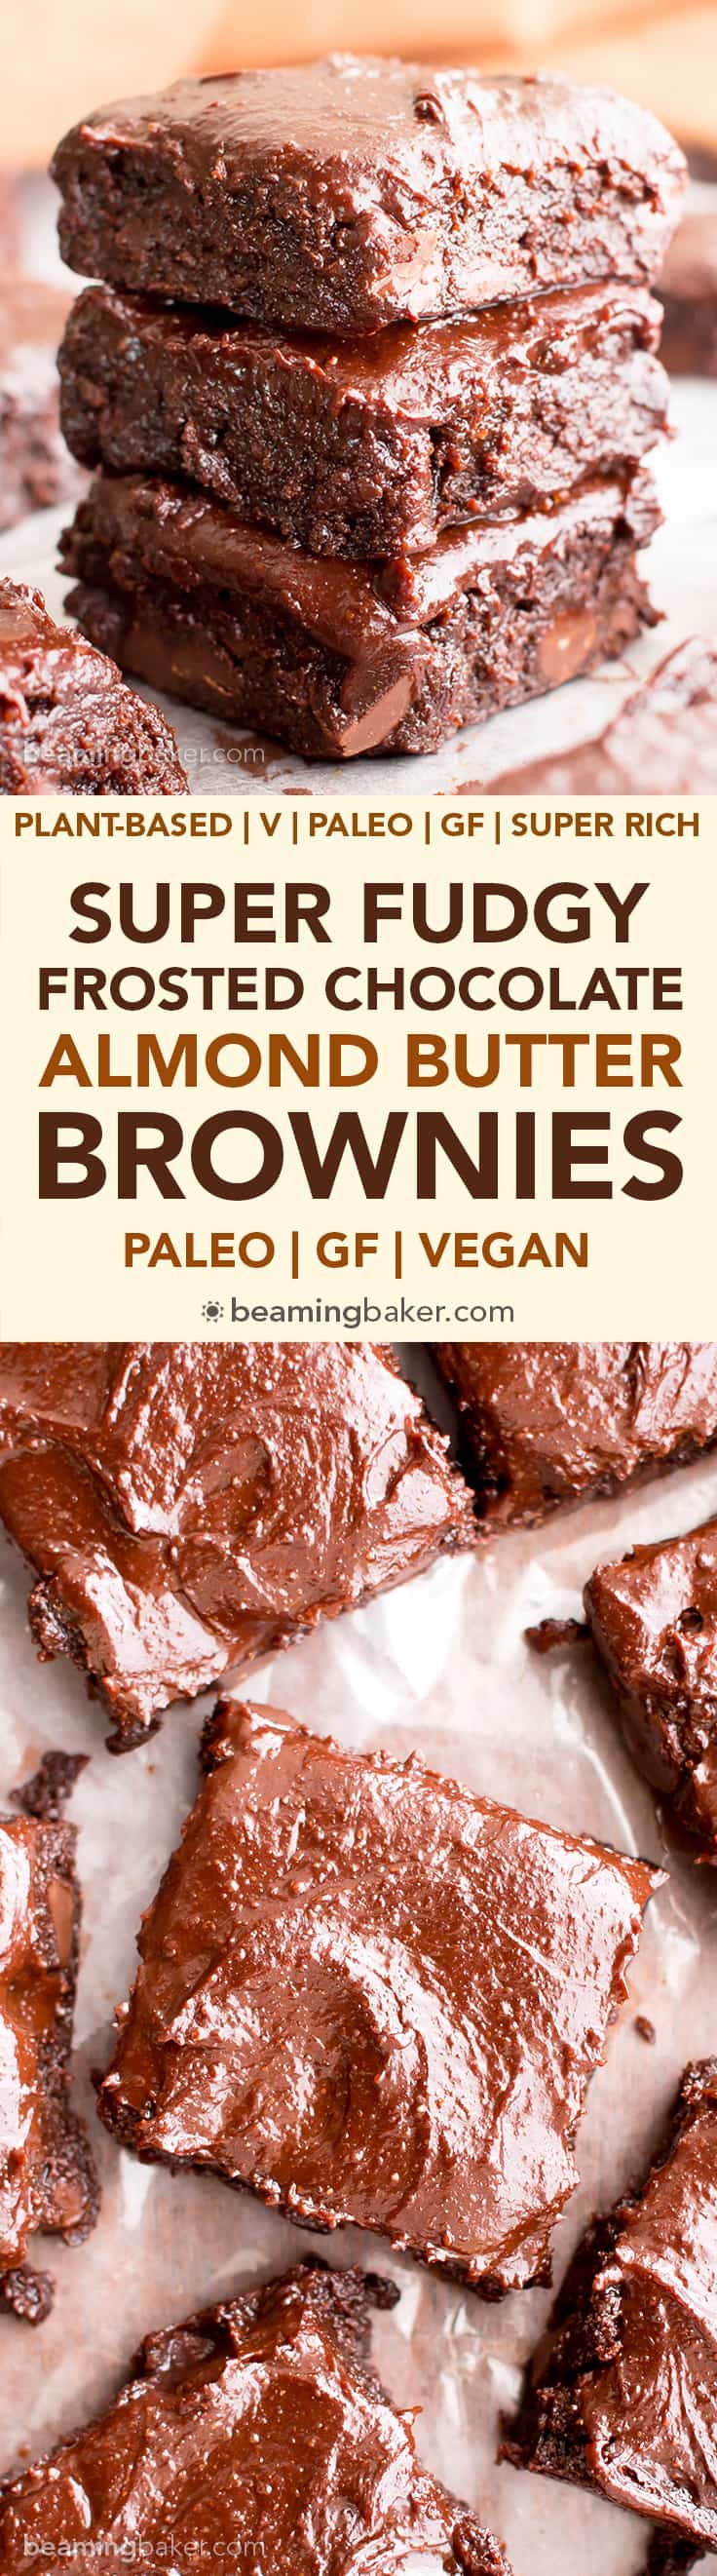 Chocolate Almond Butter Frosted Fudgy Paleo Brownies (V, GF, Paleo): a one bowl recipe for seriously fudgy paleo brownies topped with rich chocolate almond butter frosting! #Vegan #Paleo #GlutenFree #DairyFree | BeamingBaker.com